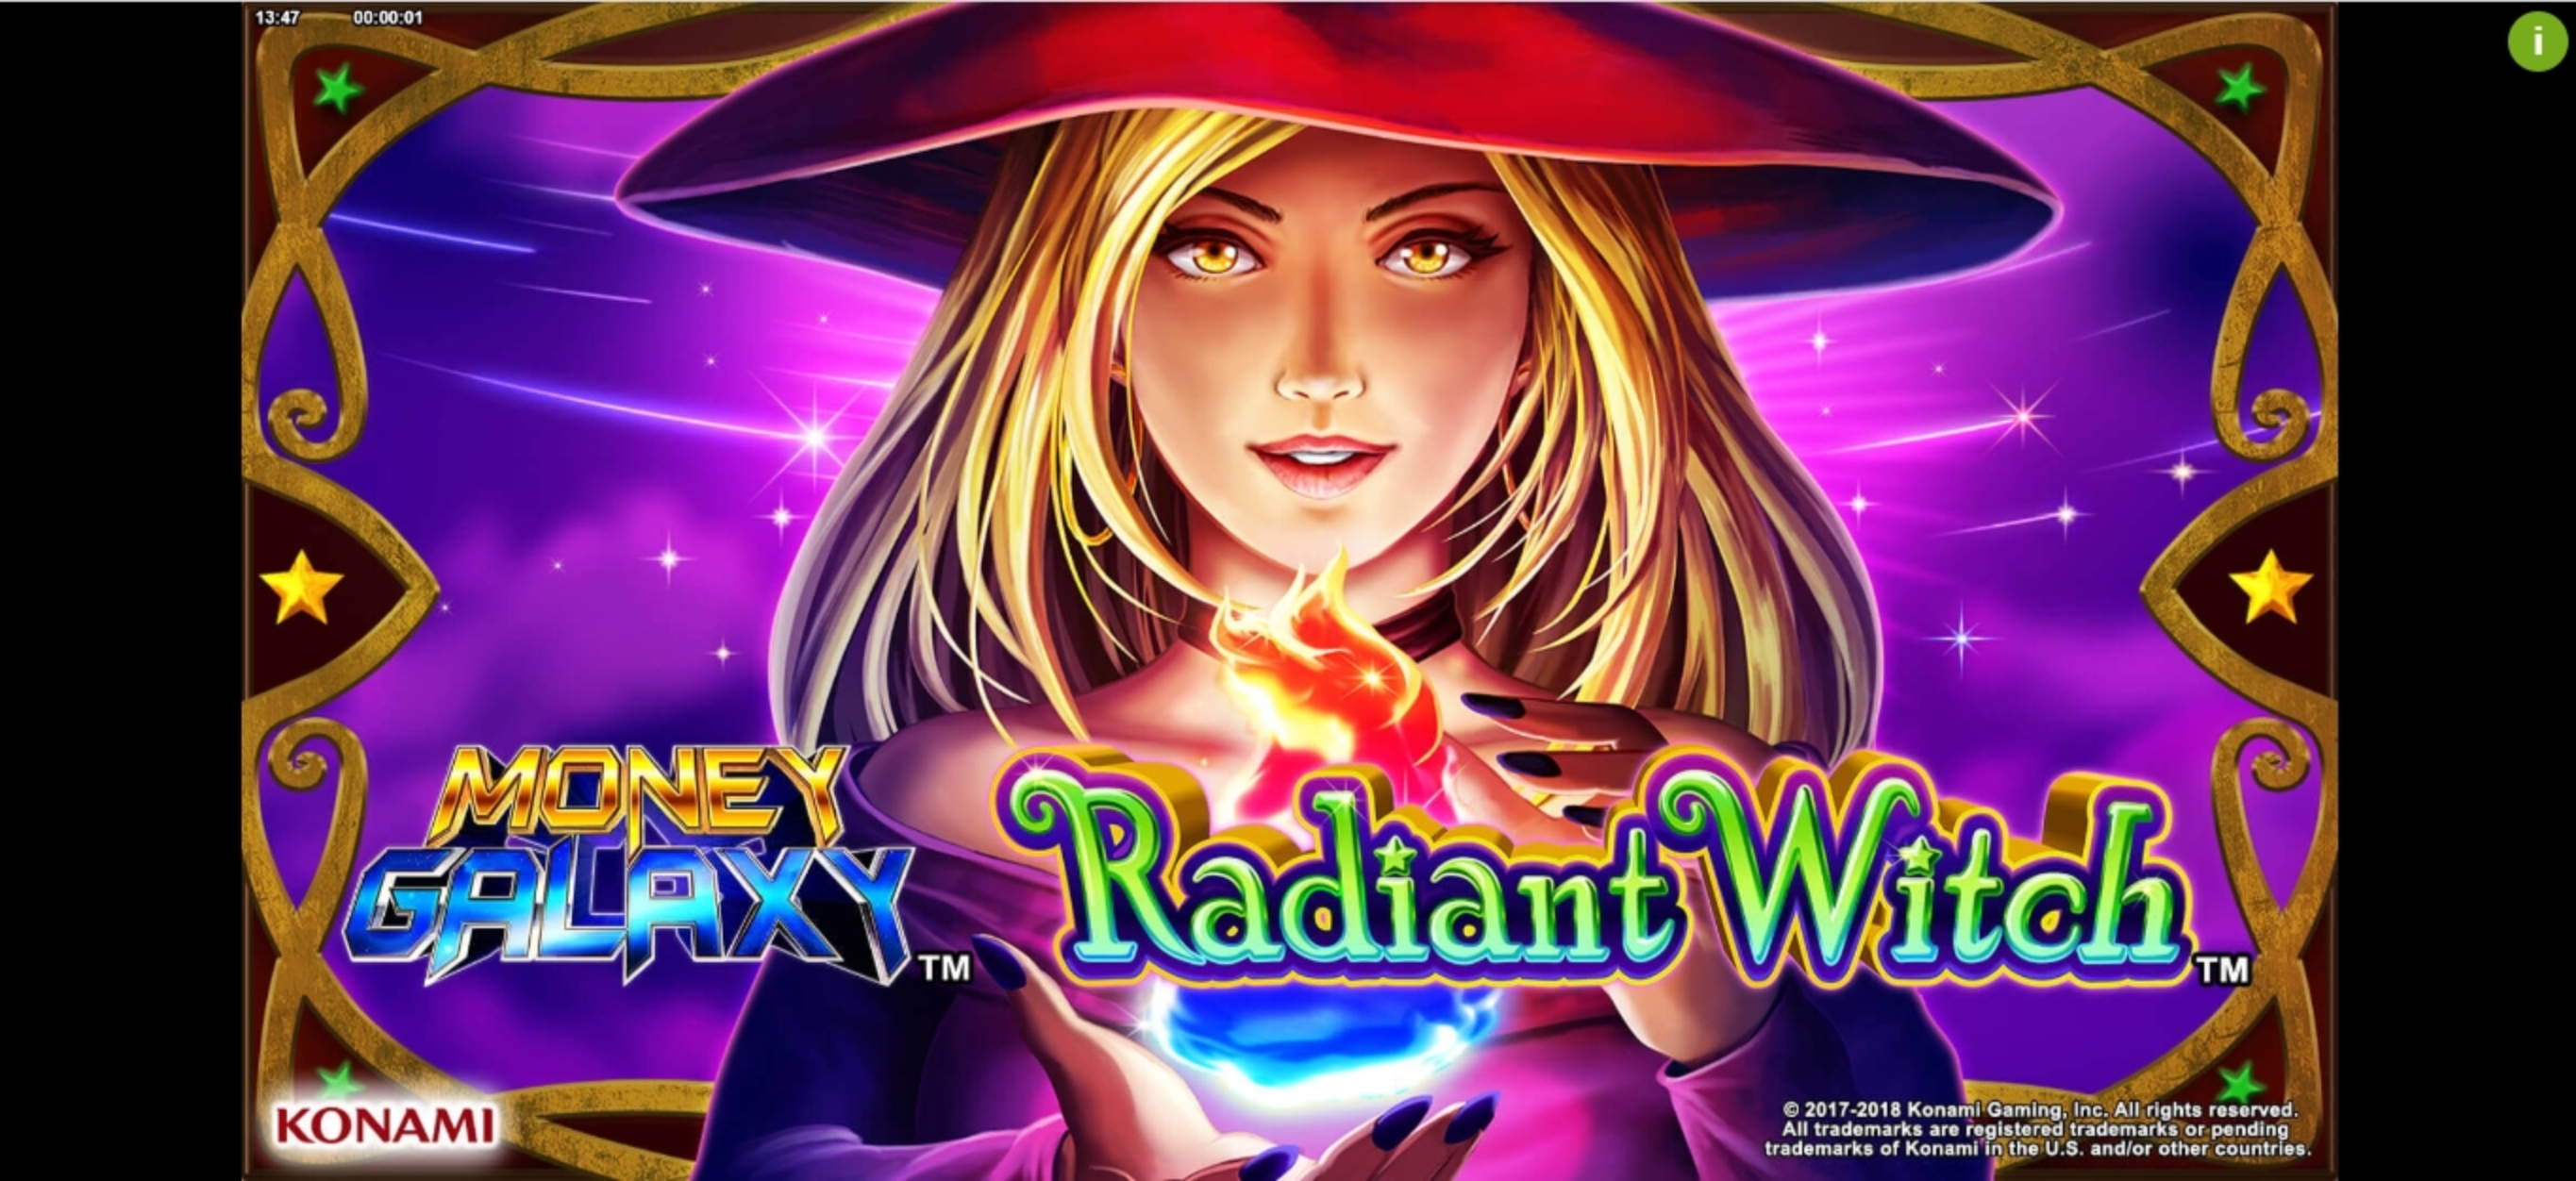 Play Money Galaxy Radiant Witch Free Casino Slot Game by Konami Gaming